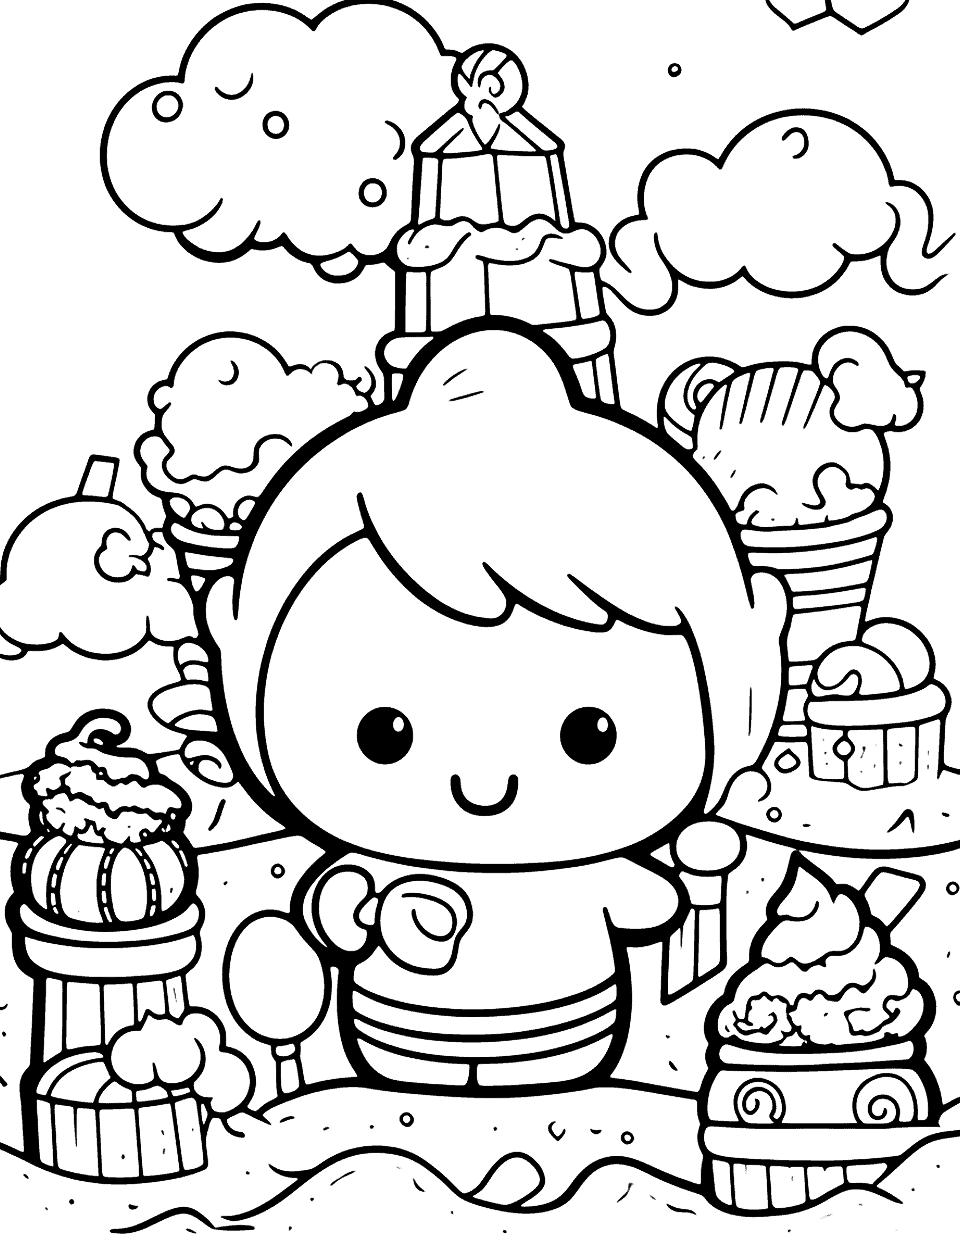 Kawaii Crush's Candyland Journey Coloring Page - Kawaii Crush characters embarking on a fun journey through a land filled with candies and sweets.